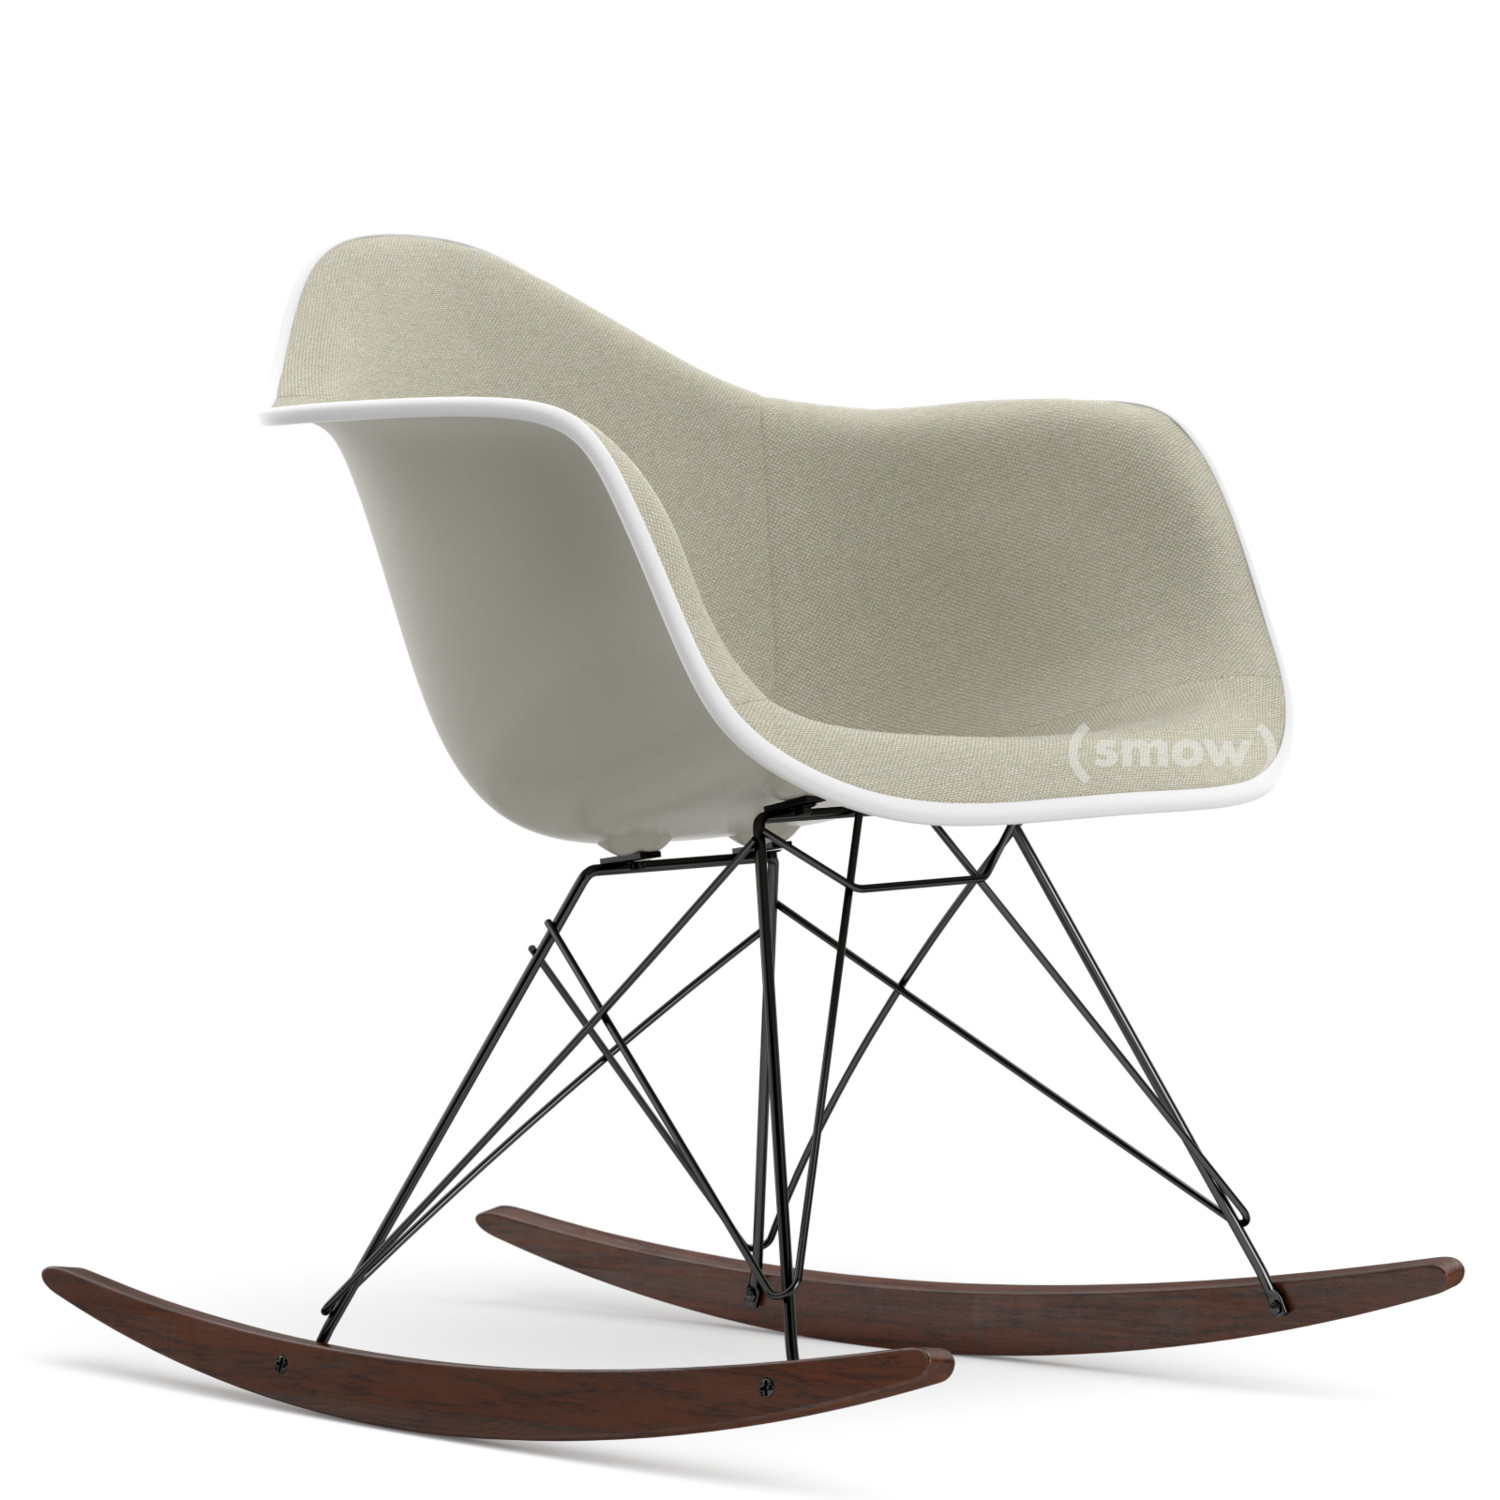 Vitra Rar With Upholstery Pebble With Full Upholstery Warm Grey Ivory White Basic Dark Dark Maple By Charles Ray Eames 1950 Designer Furniture By Smow Com